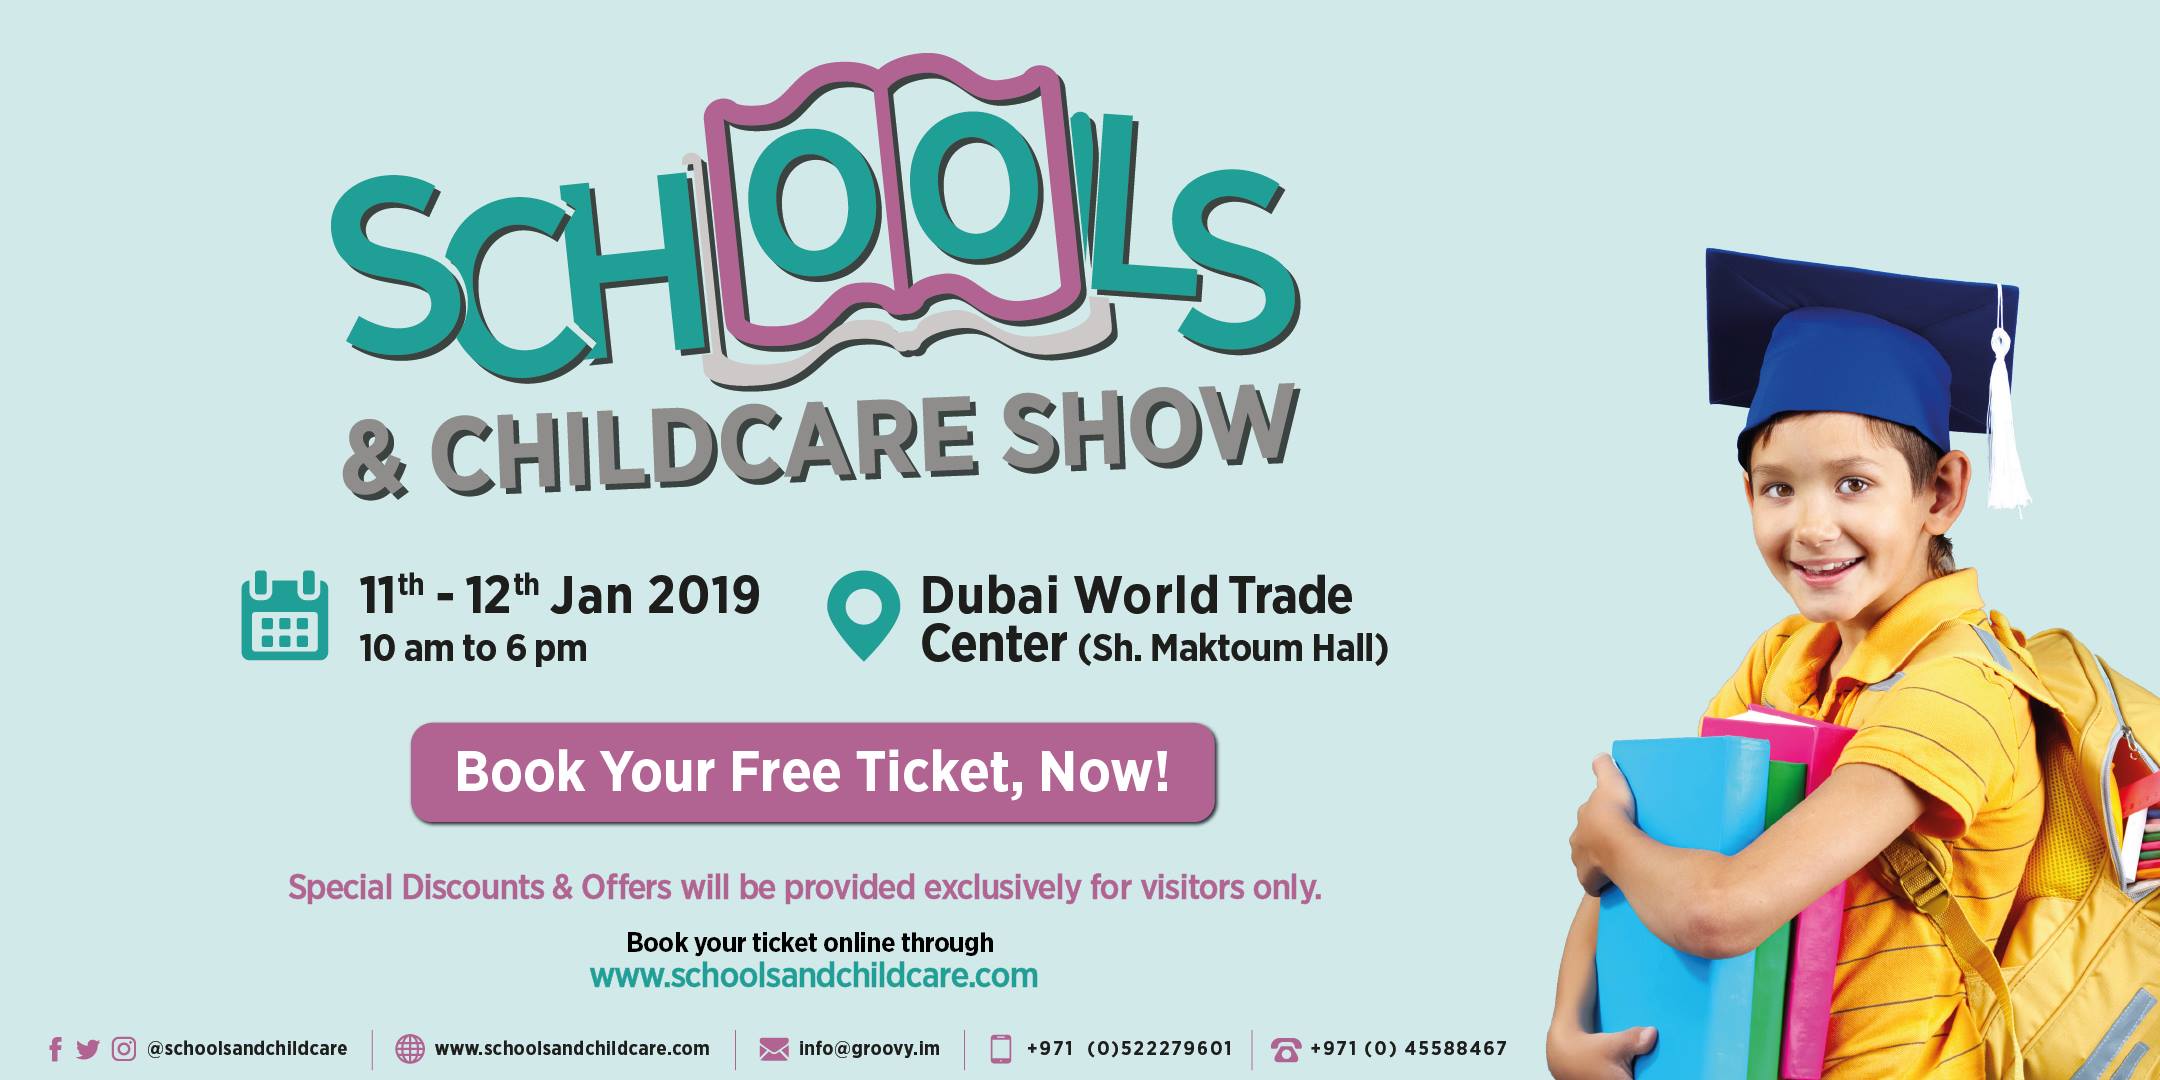 Dubai Schools and Childcare Show 2019 - Coming Soon in UAE